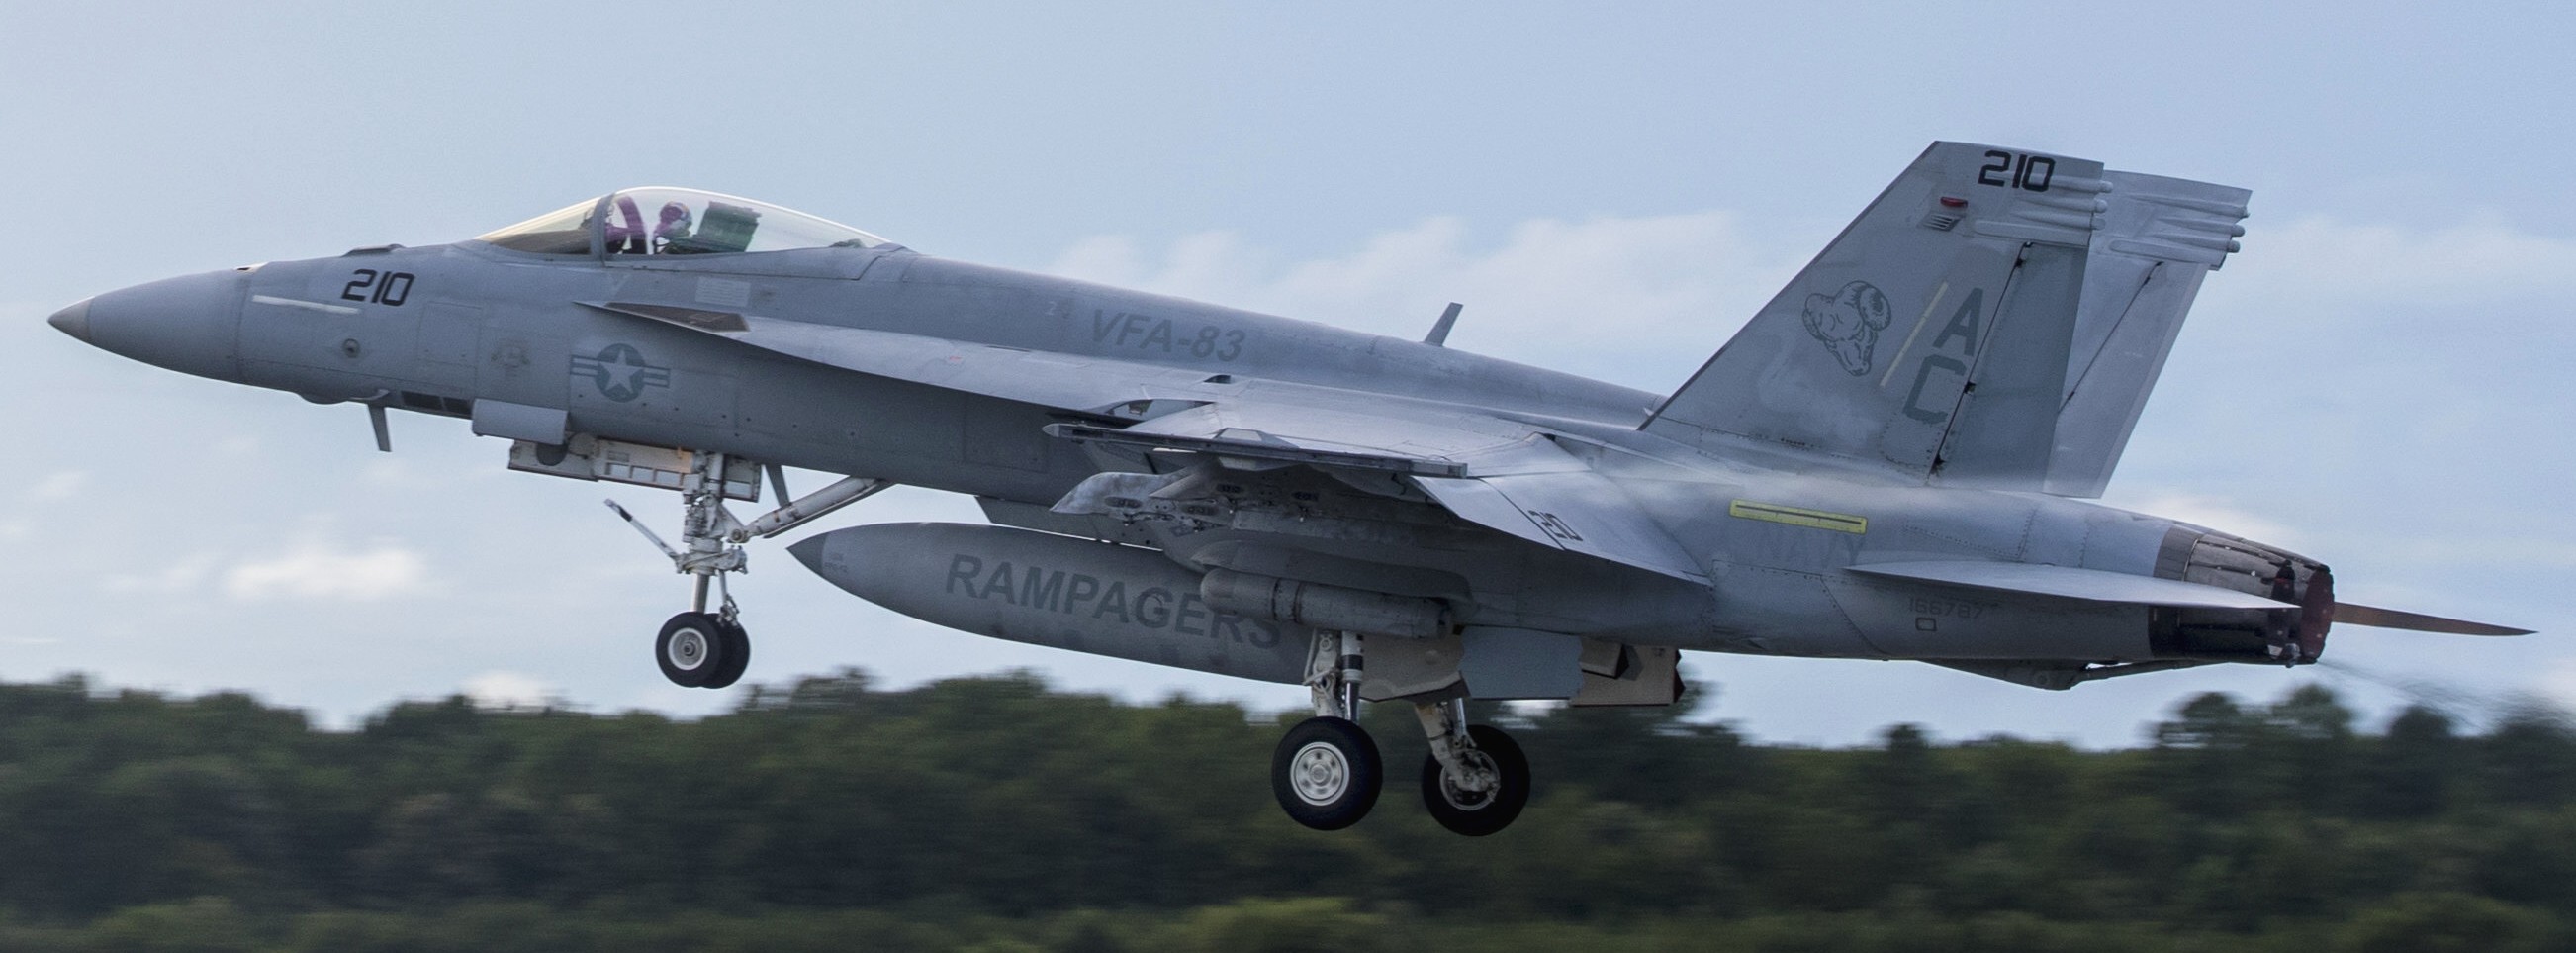 vfa-83 rampagers strike fighter squadron f/a-18e super hornet us navy nas oceana virginia 46